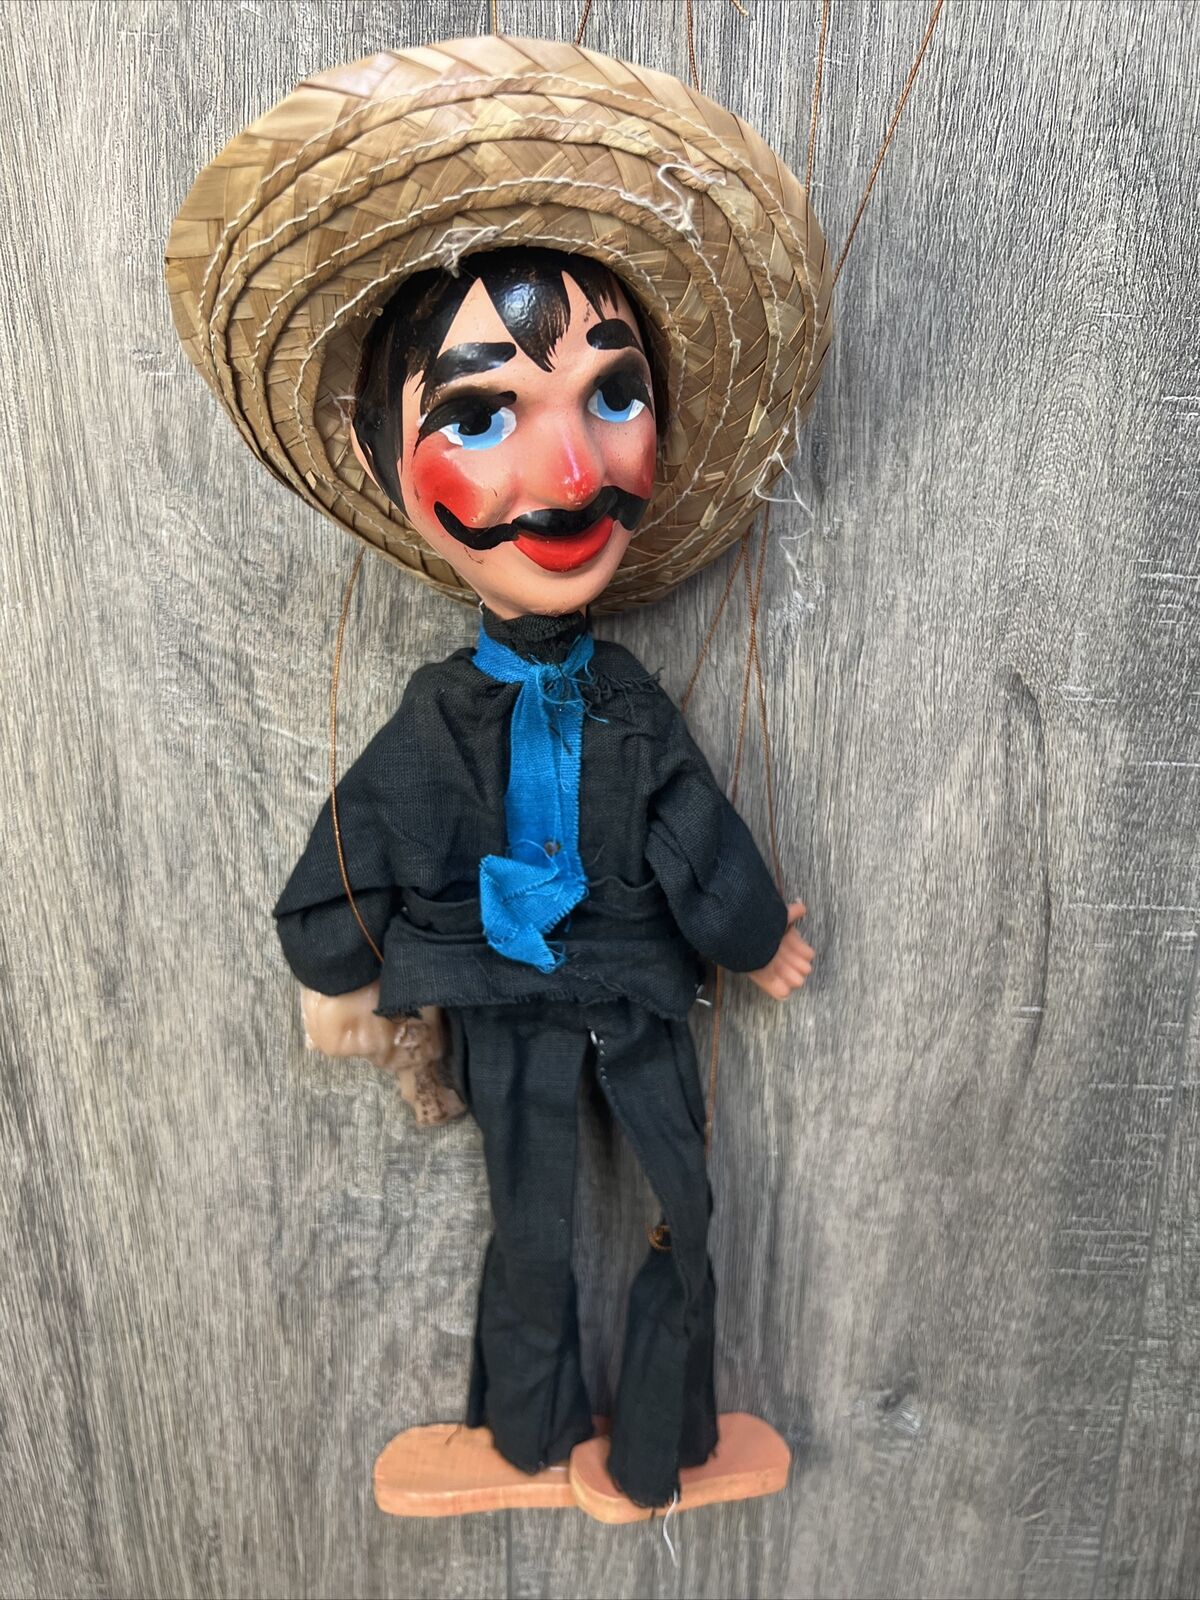 VINTAGE MEXICAN BANDITO BANDIT OUTLAW WOODEN MARIONETTE PUPPET DOLL 13\